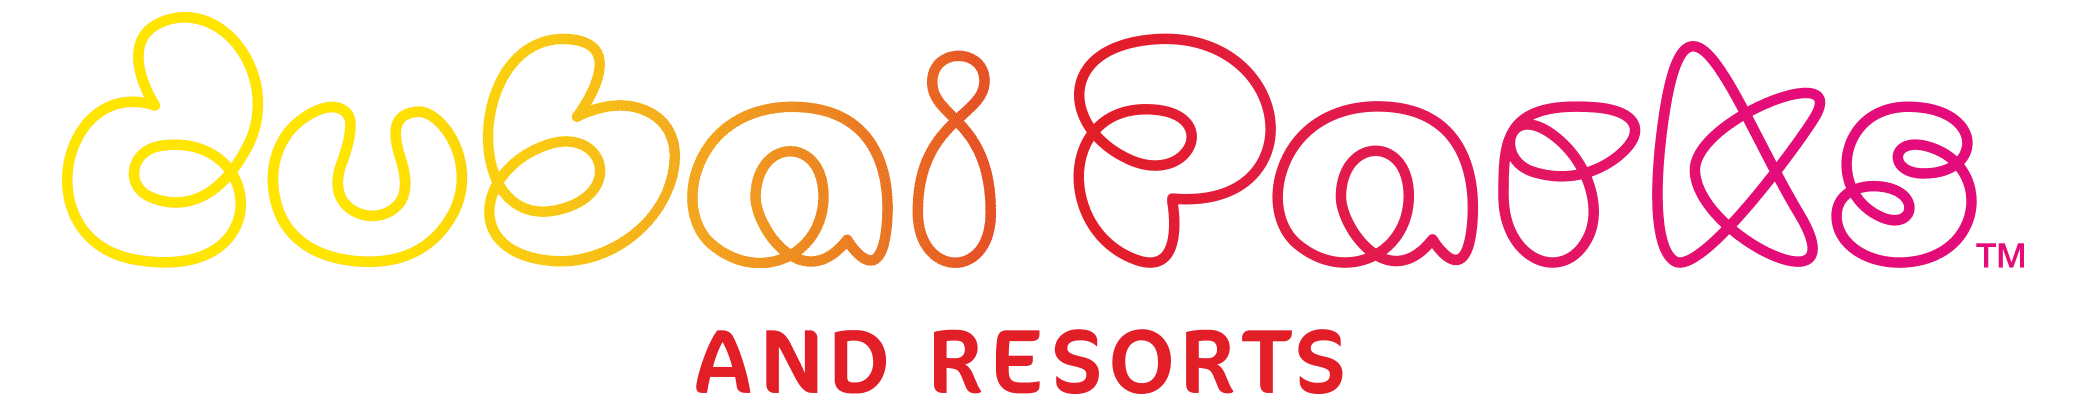 Genting: Leading Leisure and Hospitality Corporation in Malaysia ...